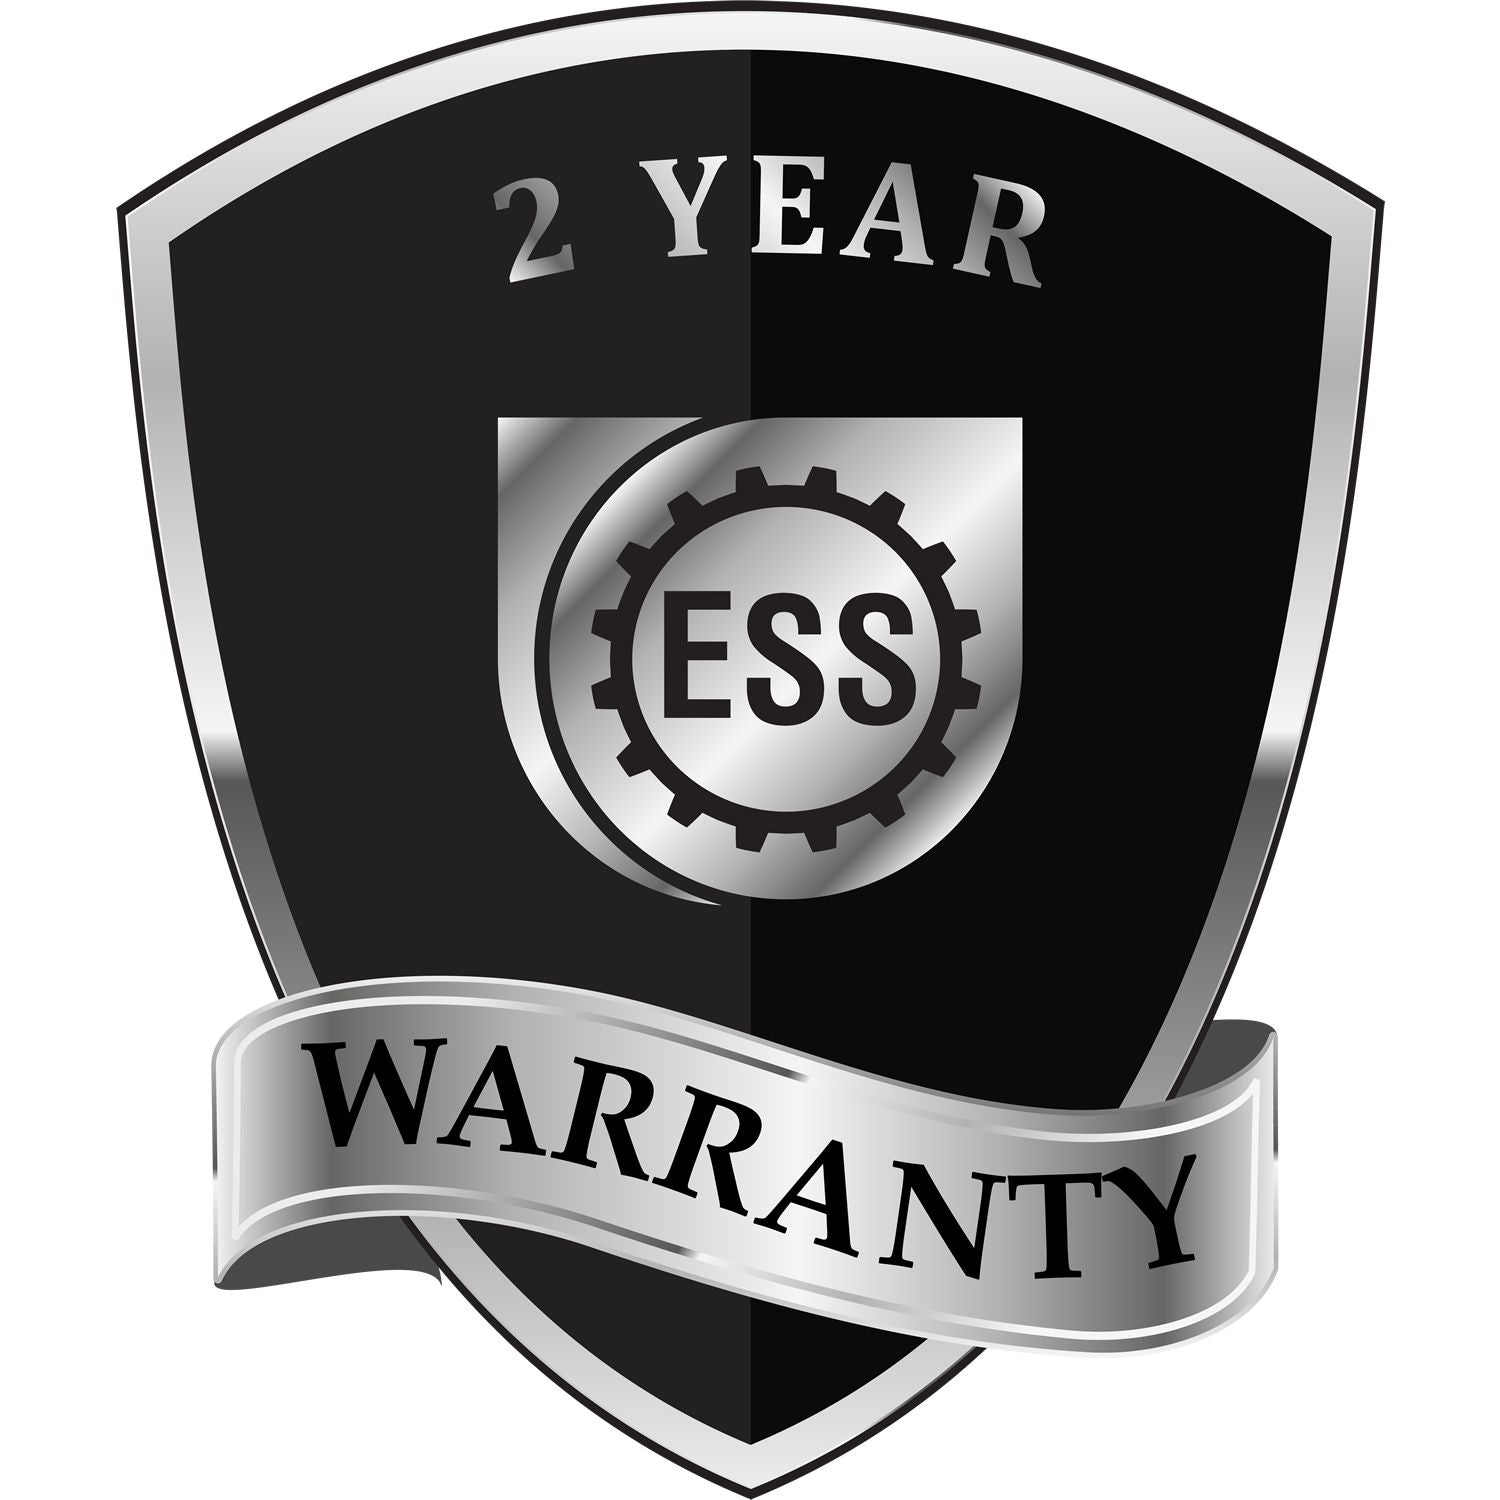 A badge or emblem showing a warranty icon for the New Mexico Desk Surveyor Seal Embosser